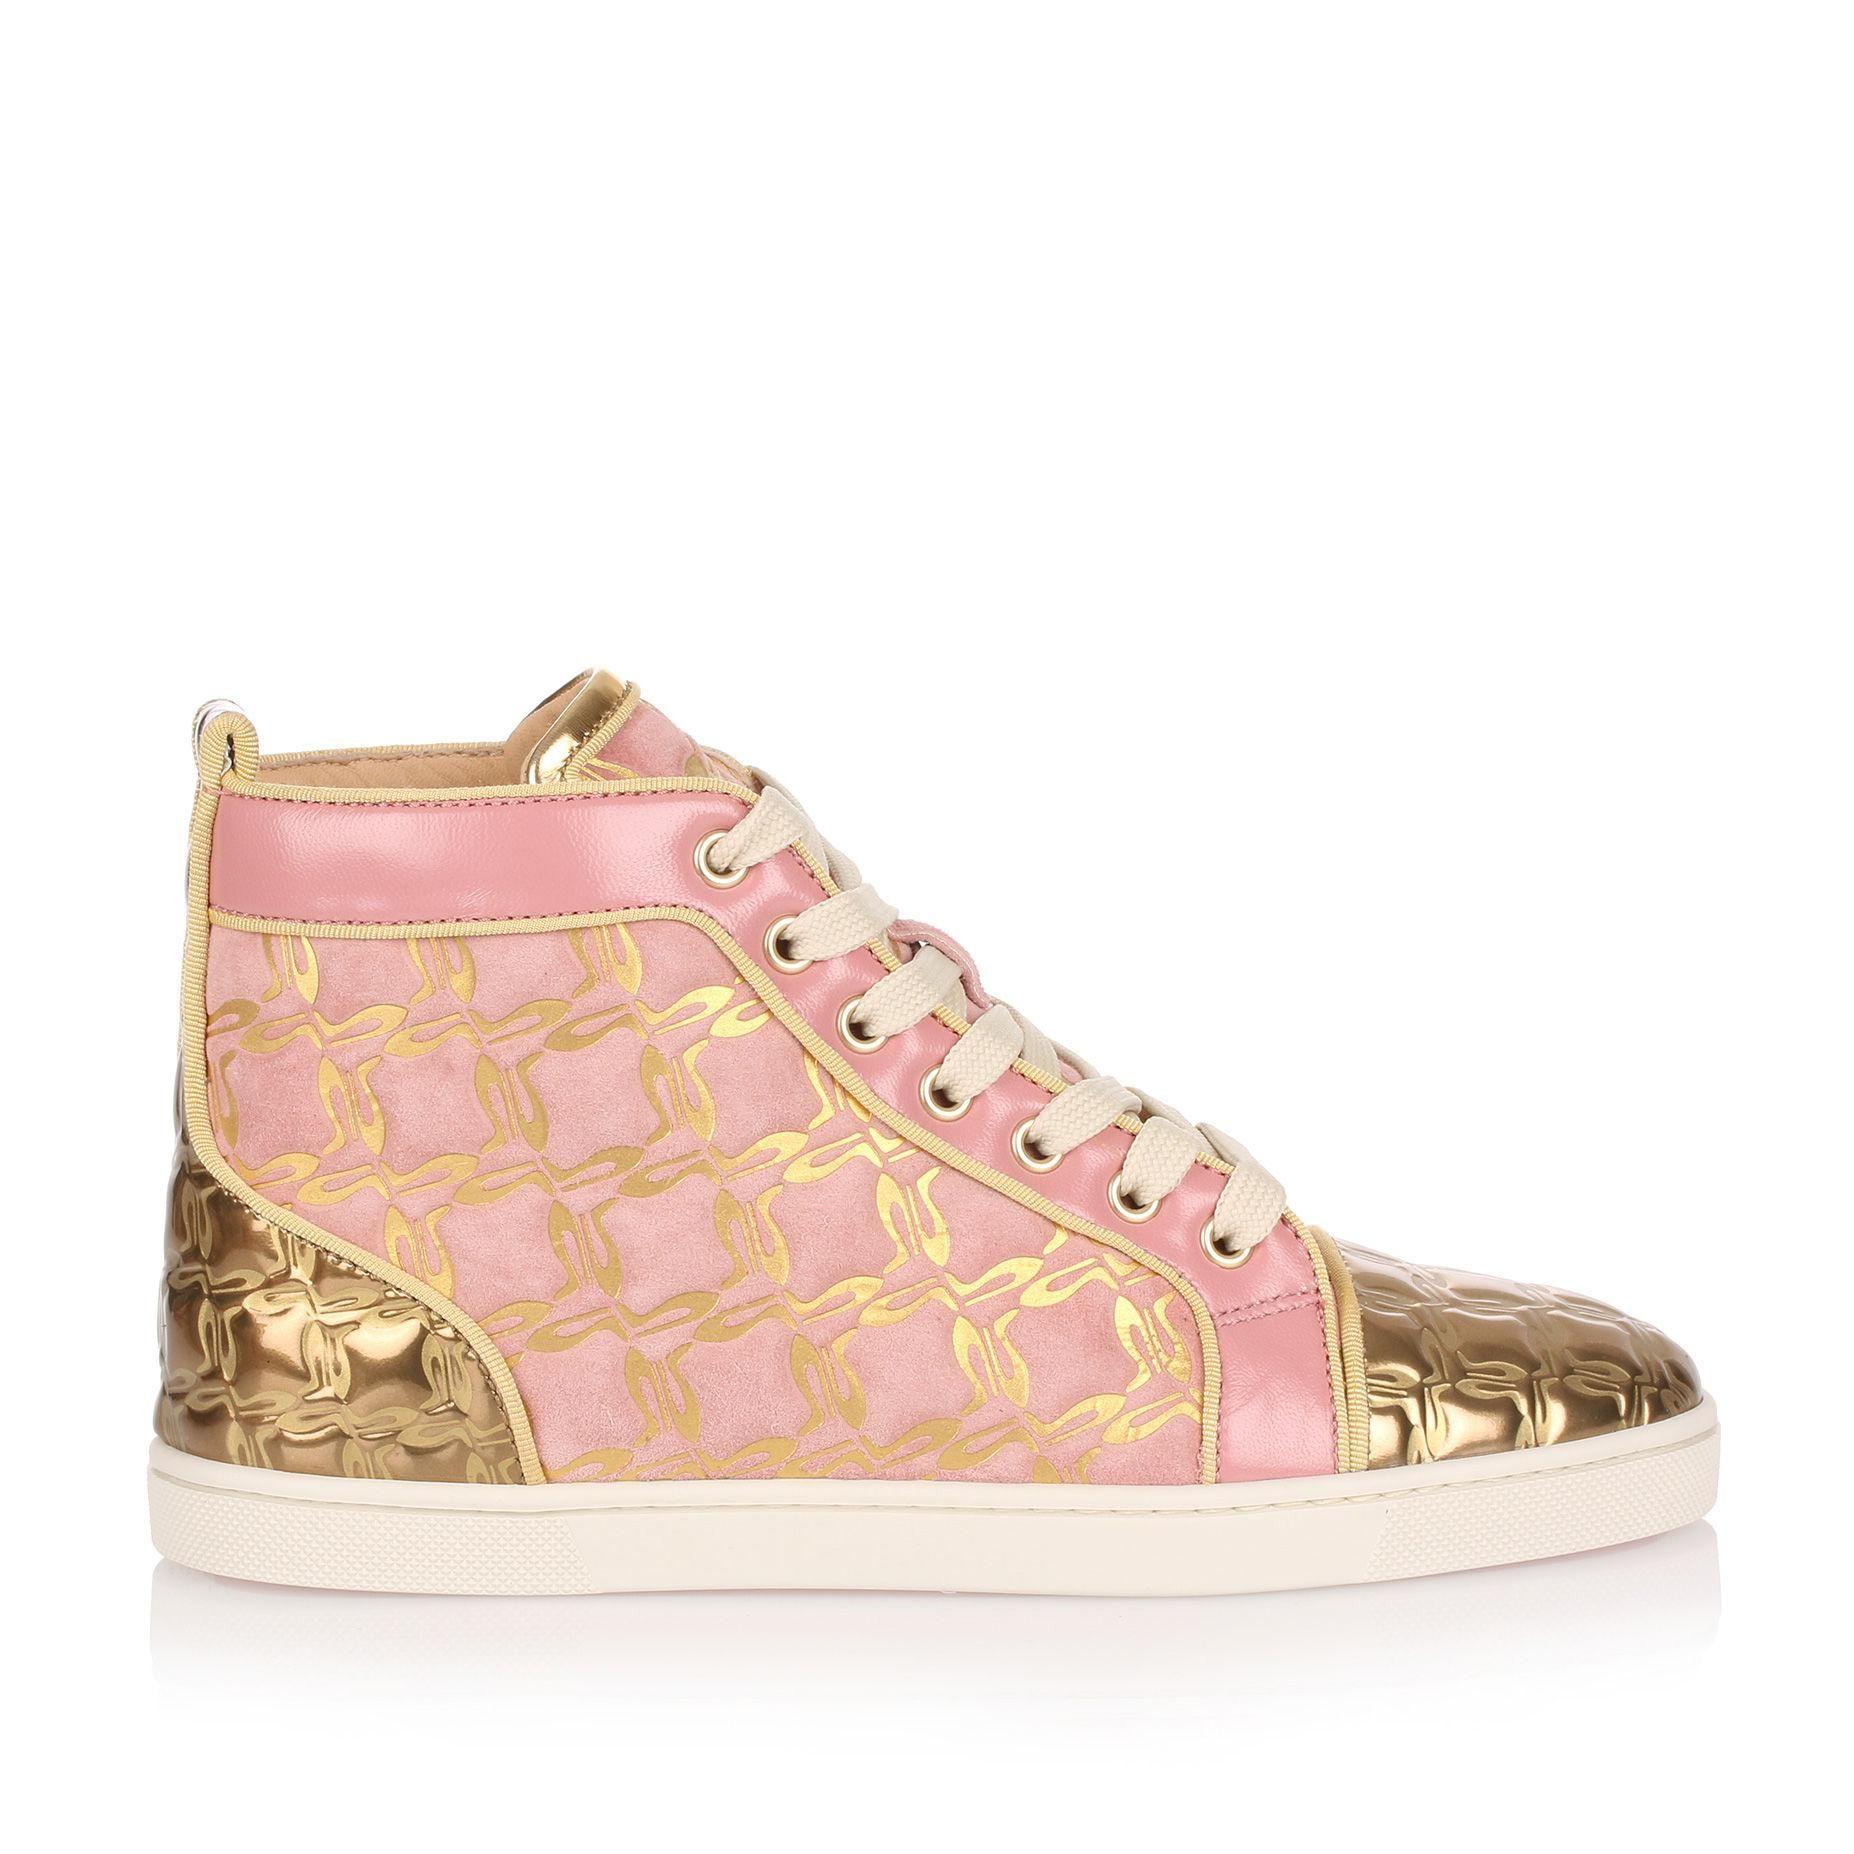 Gold Christian Louboutin Logo - Lyst - Christian Louboutin Bip Bip Pink And Gold Suede Sneaker Us in ...